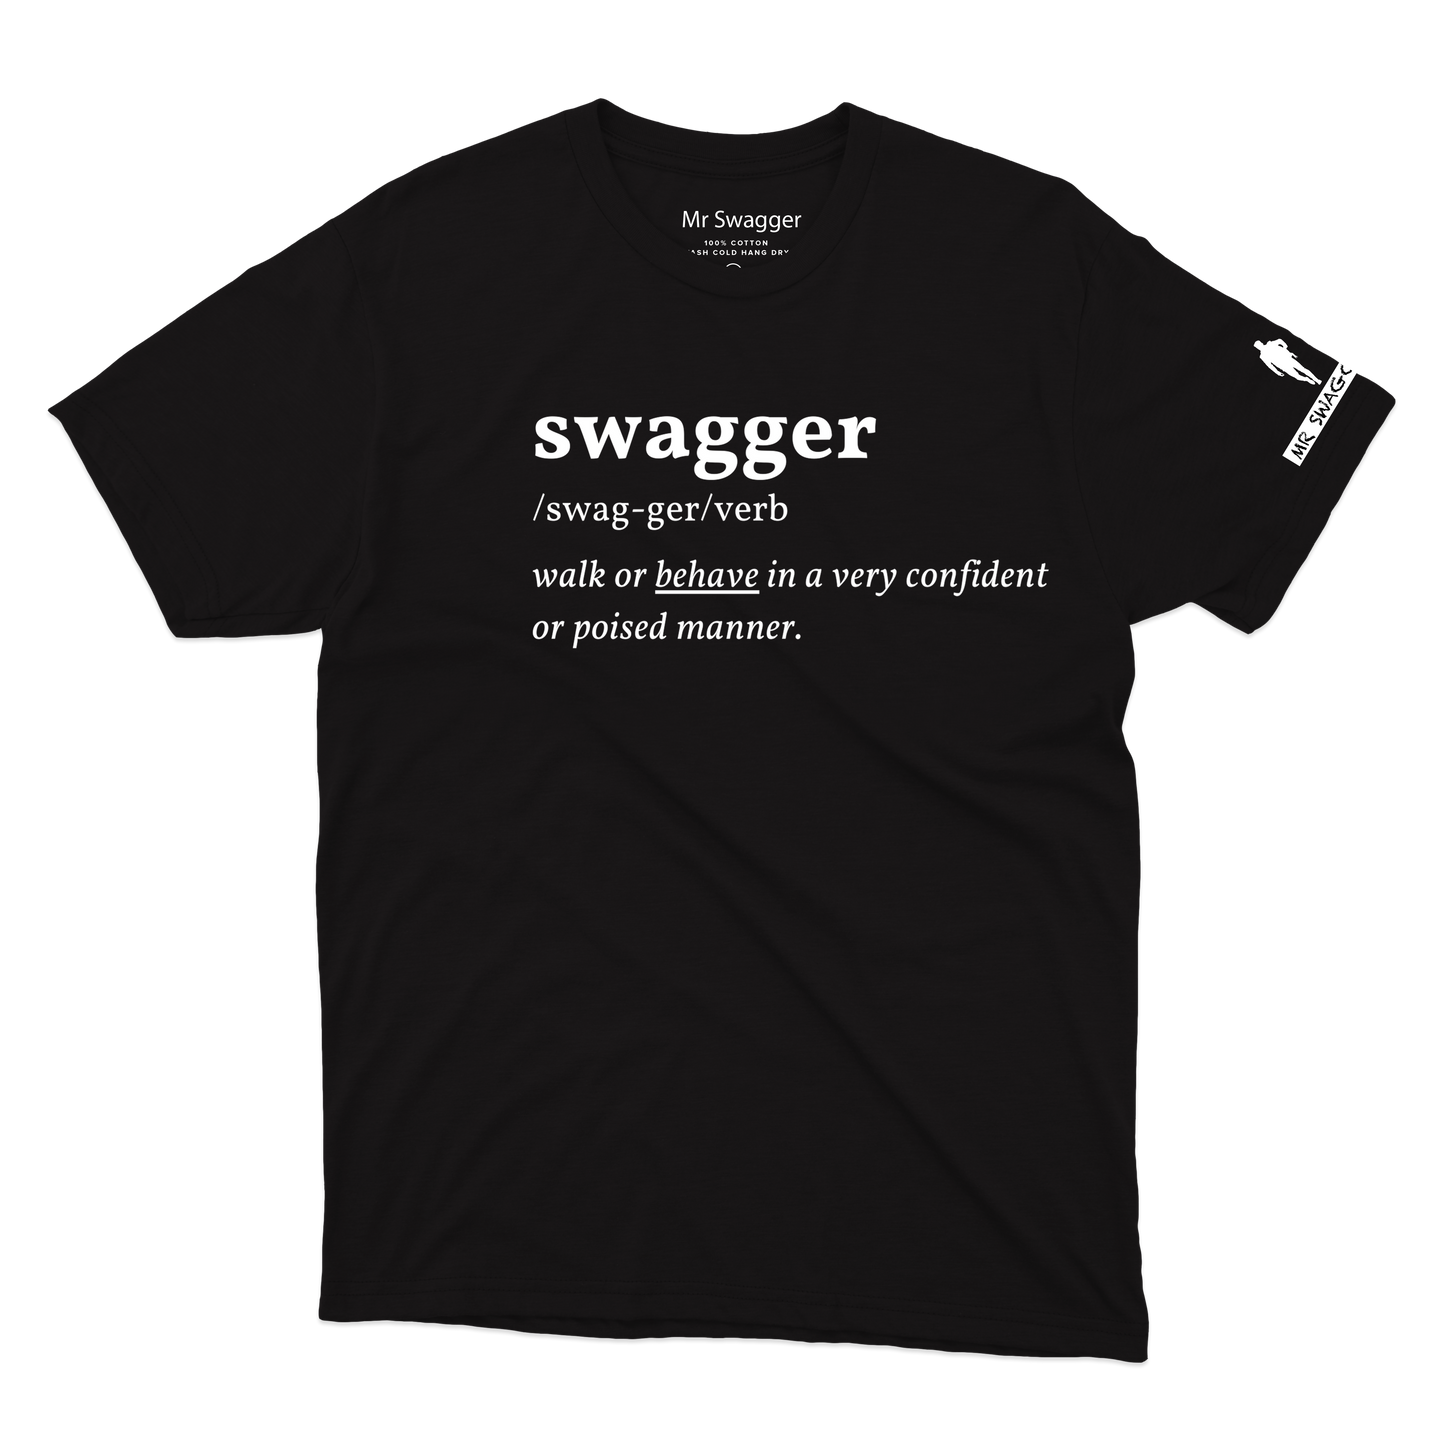 Swagger Definition Tee Black